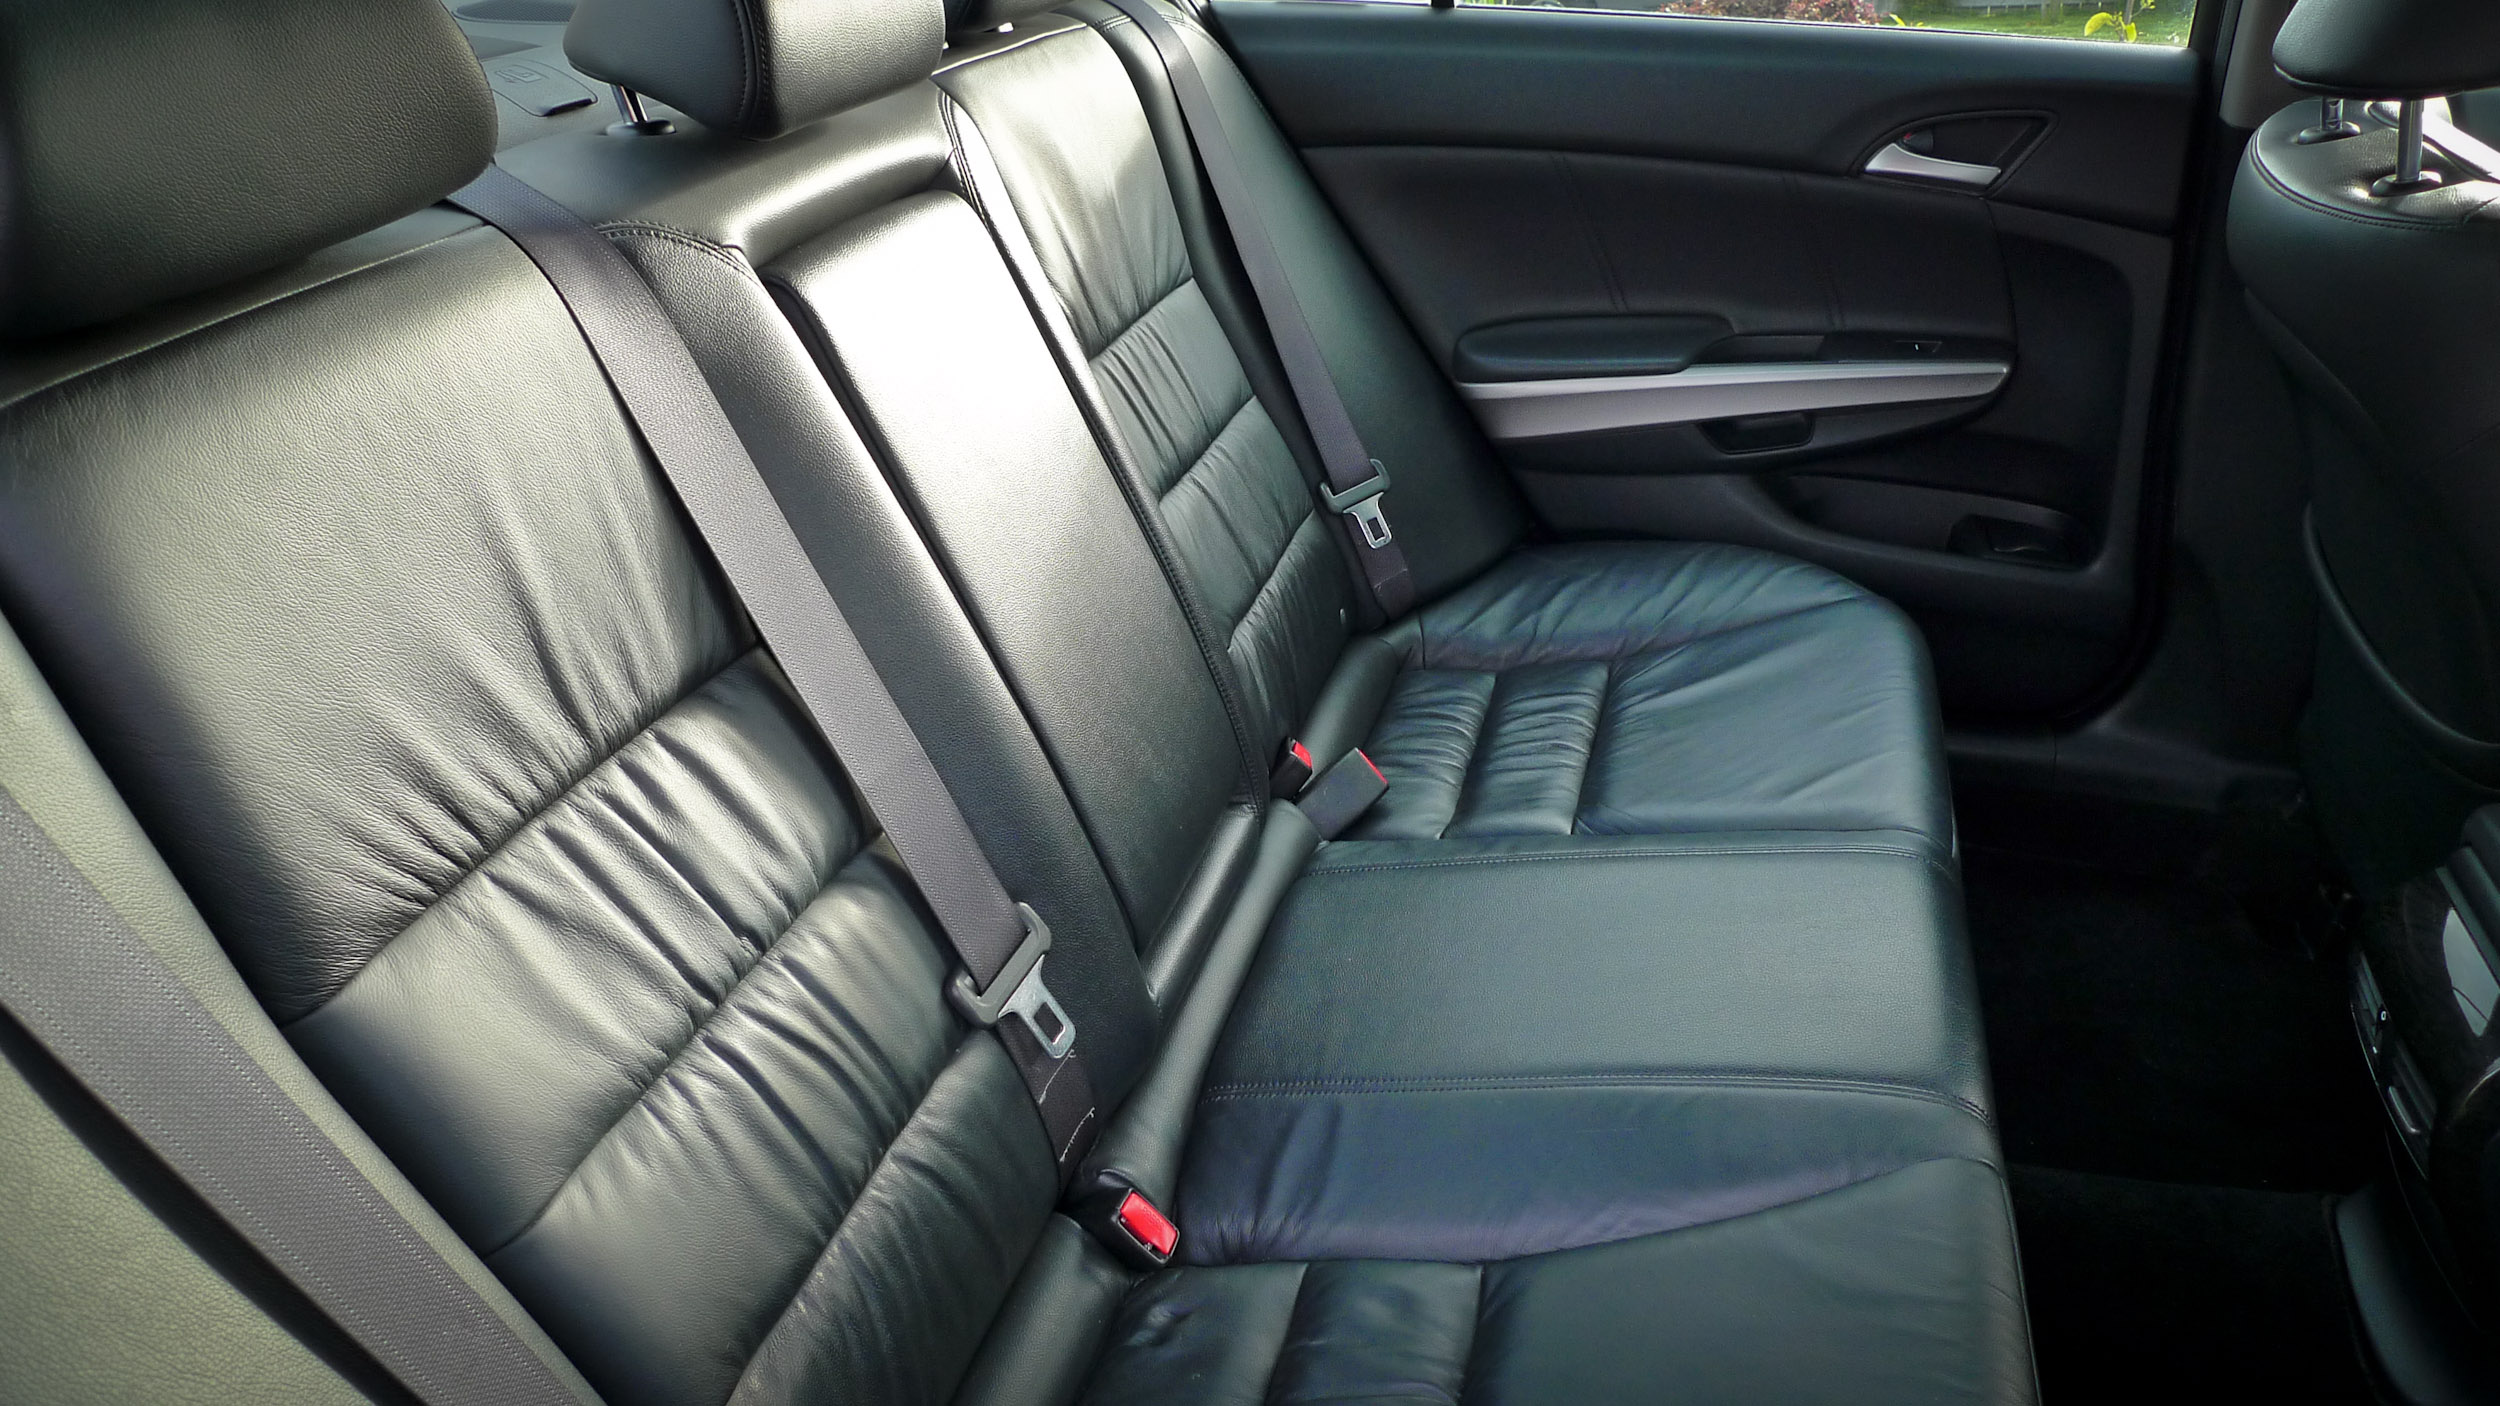 Rear leather seats after detailing and grooming